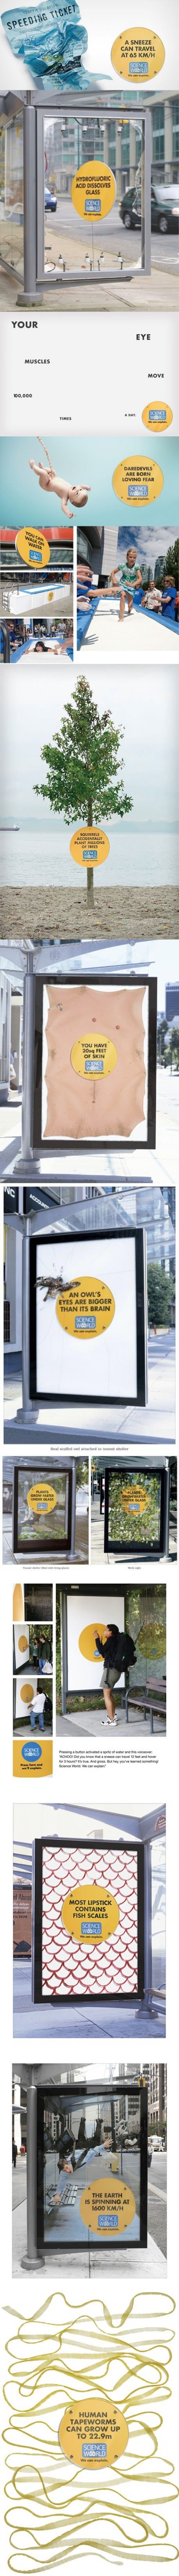 Clever Ads from Science World Part 2